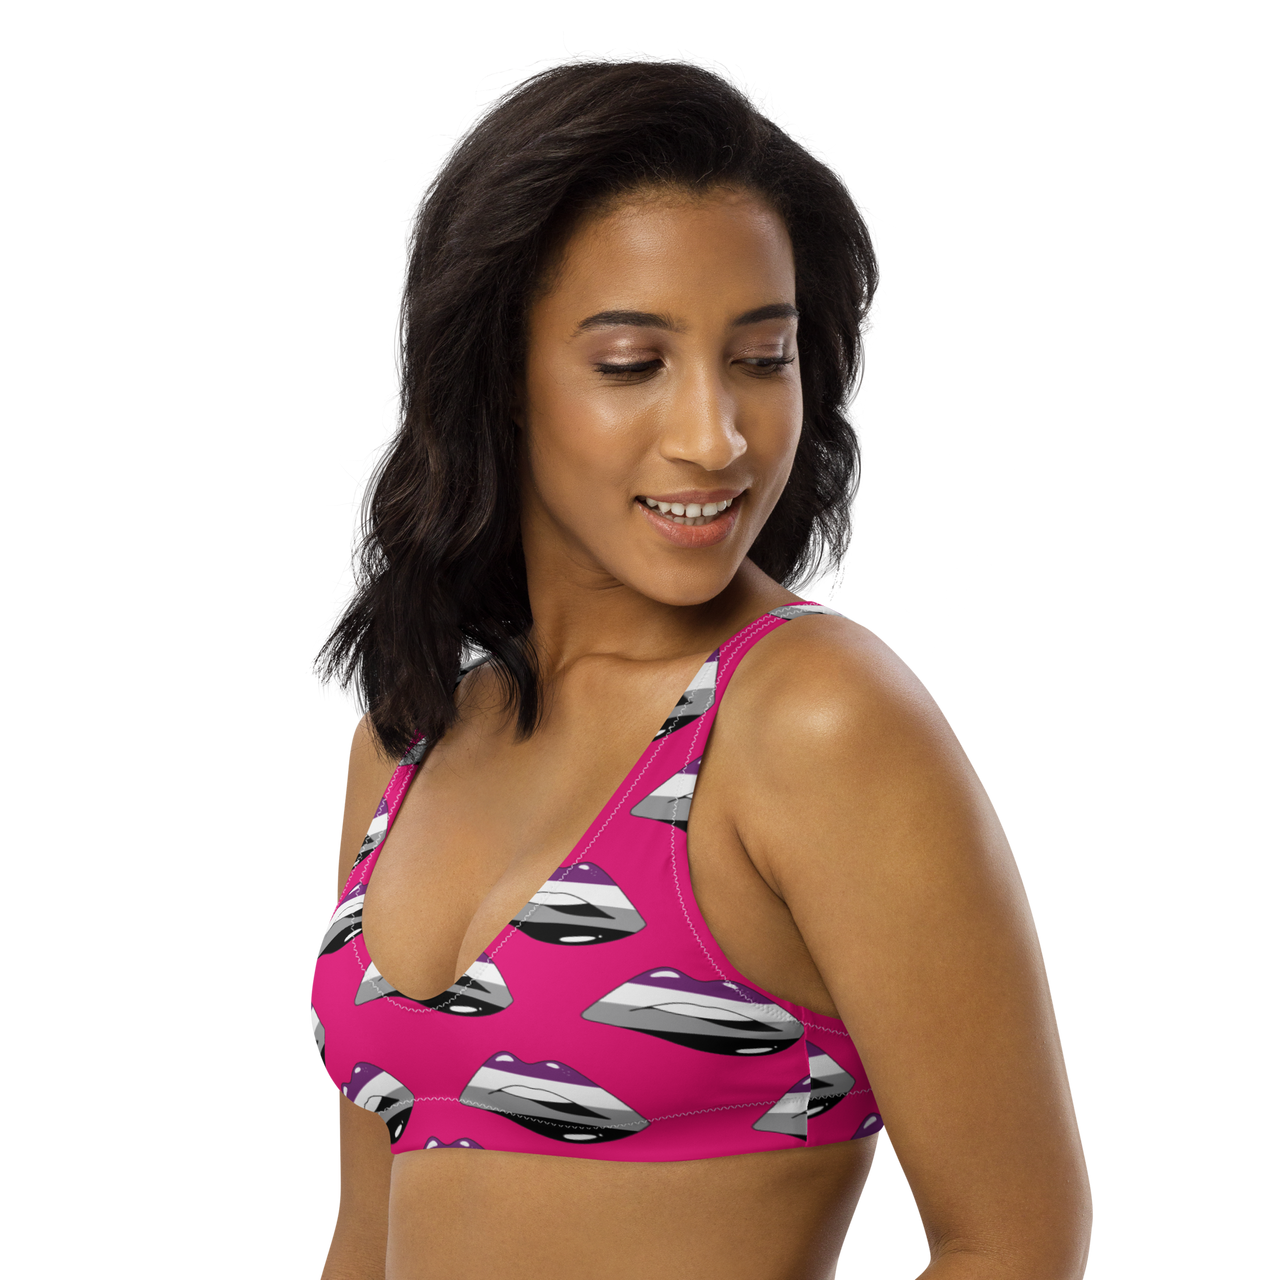 Asexual Flag Kisses Padded Bikini Top for They/Them Him/Her - Pink SHAVA